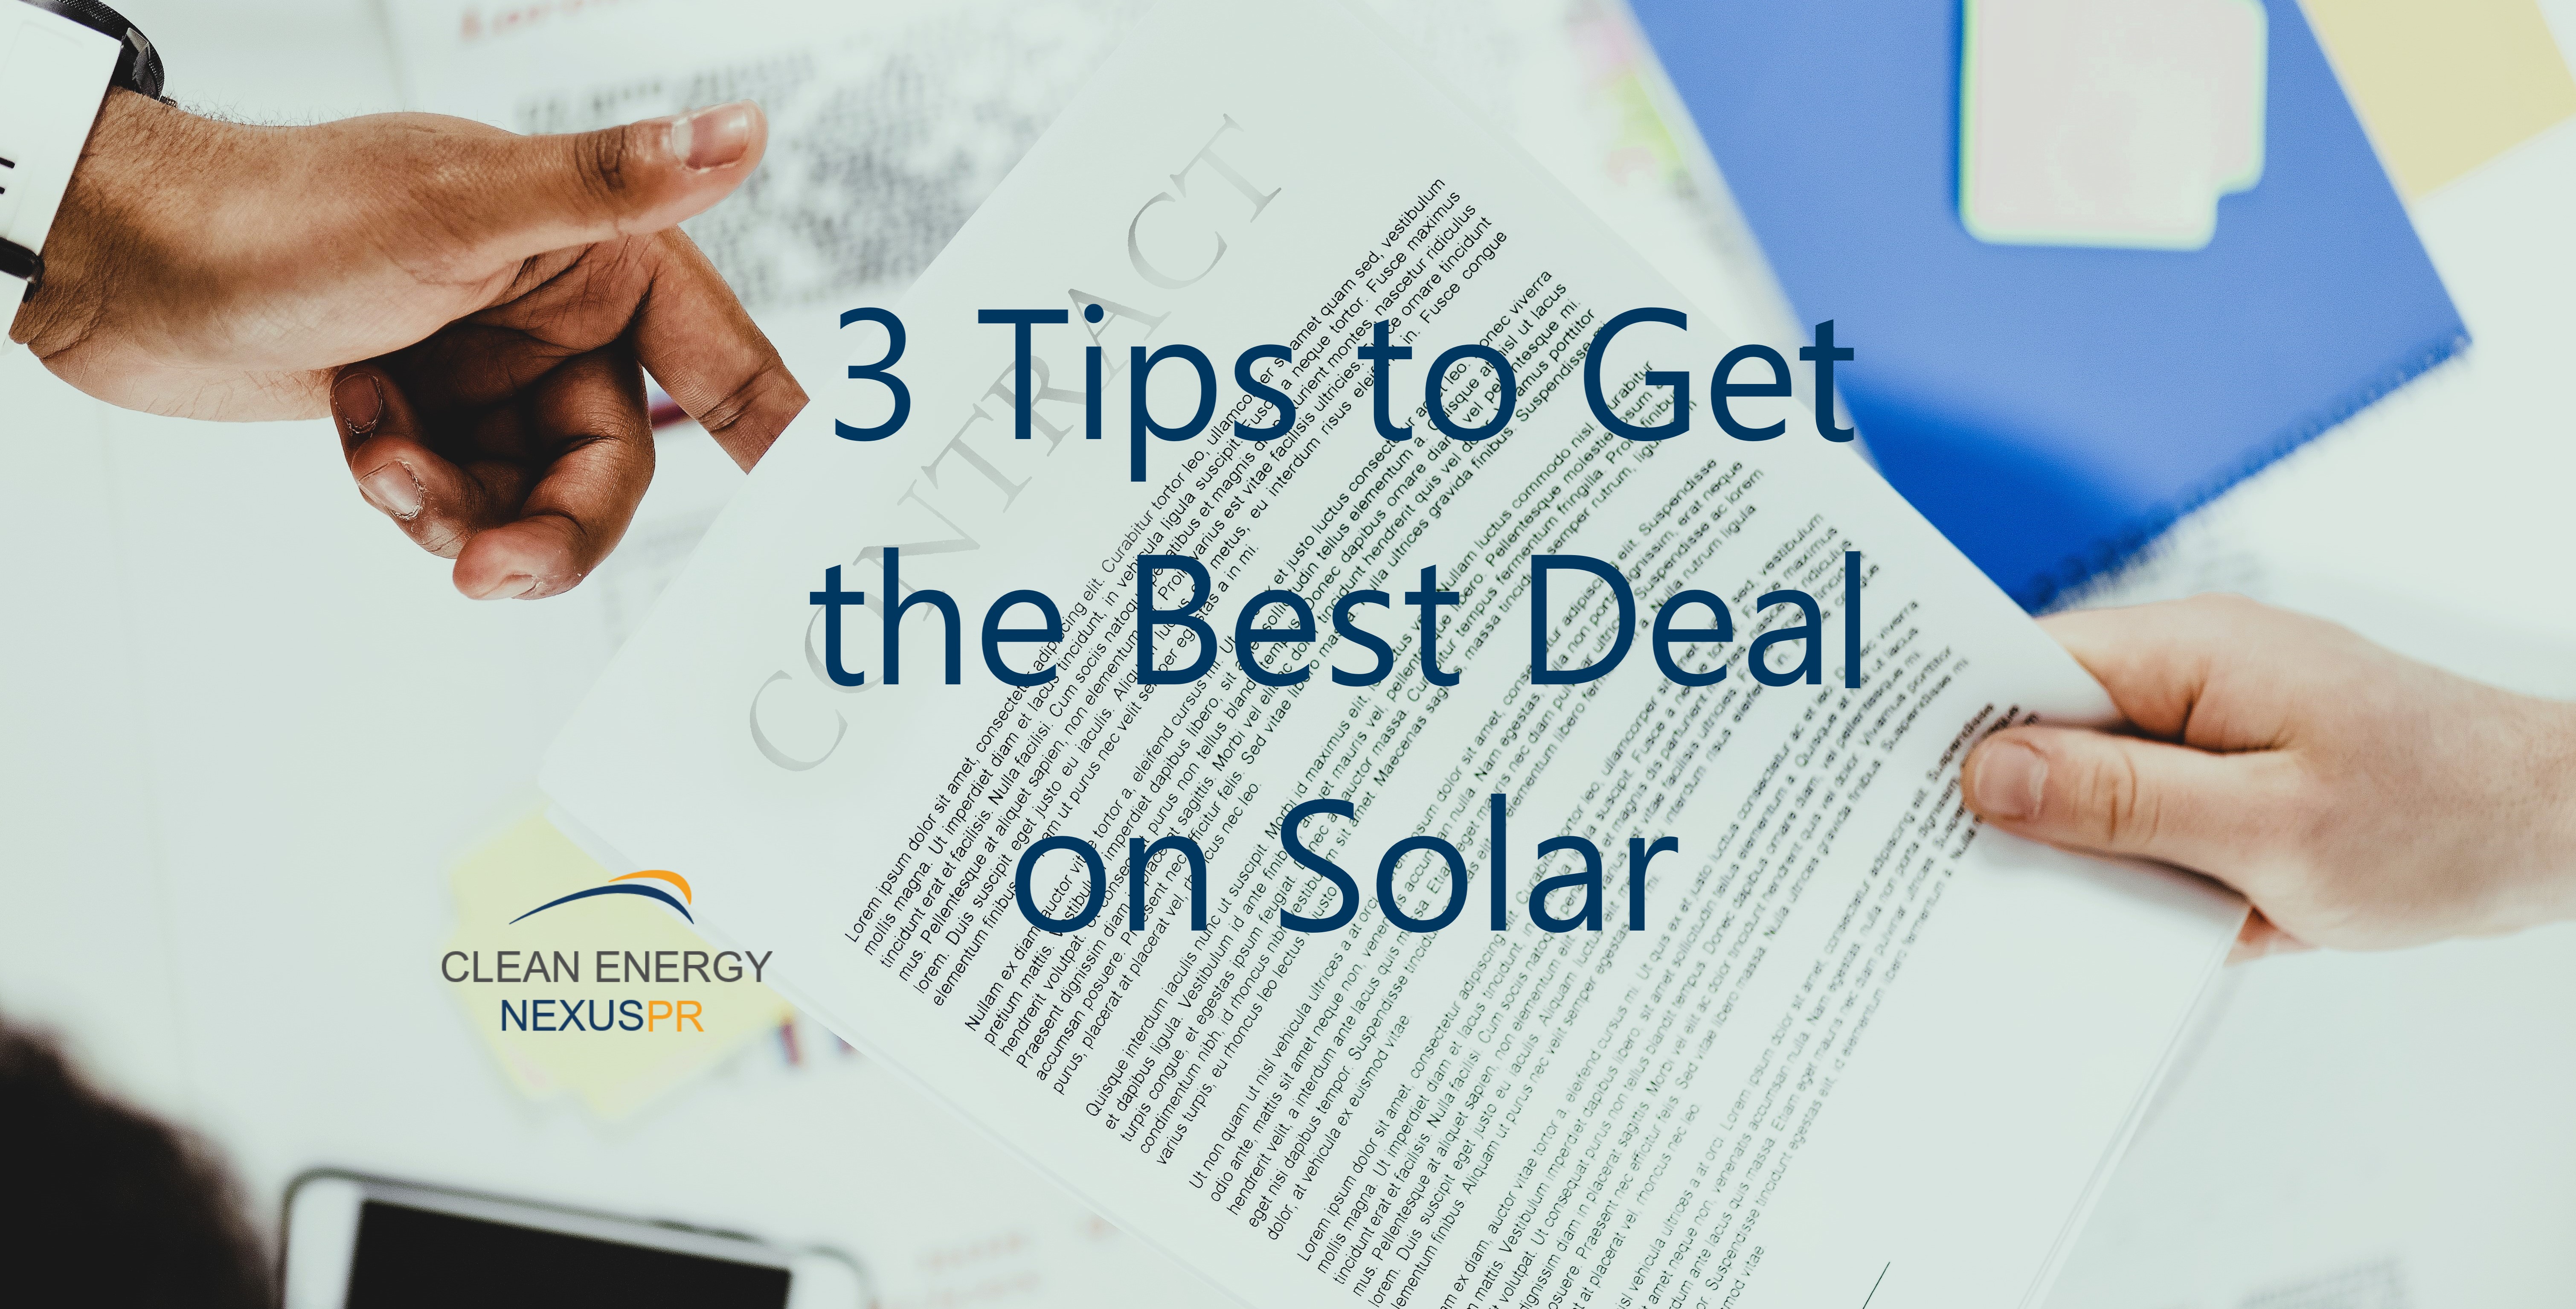 3 Tips to Get the Best Deal on Solar